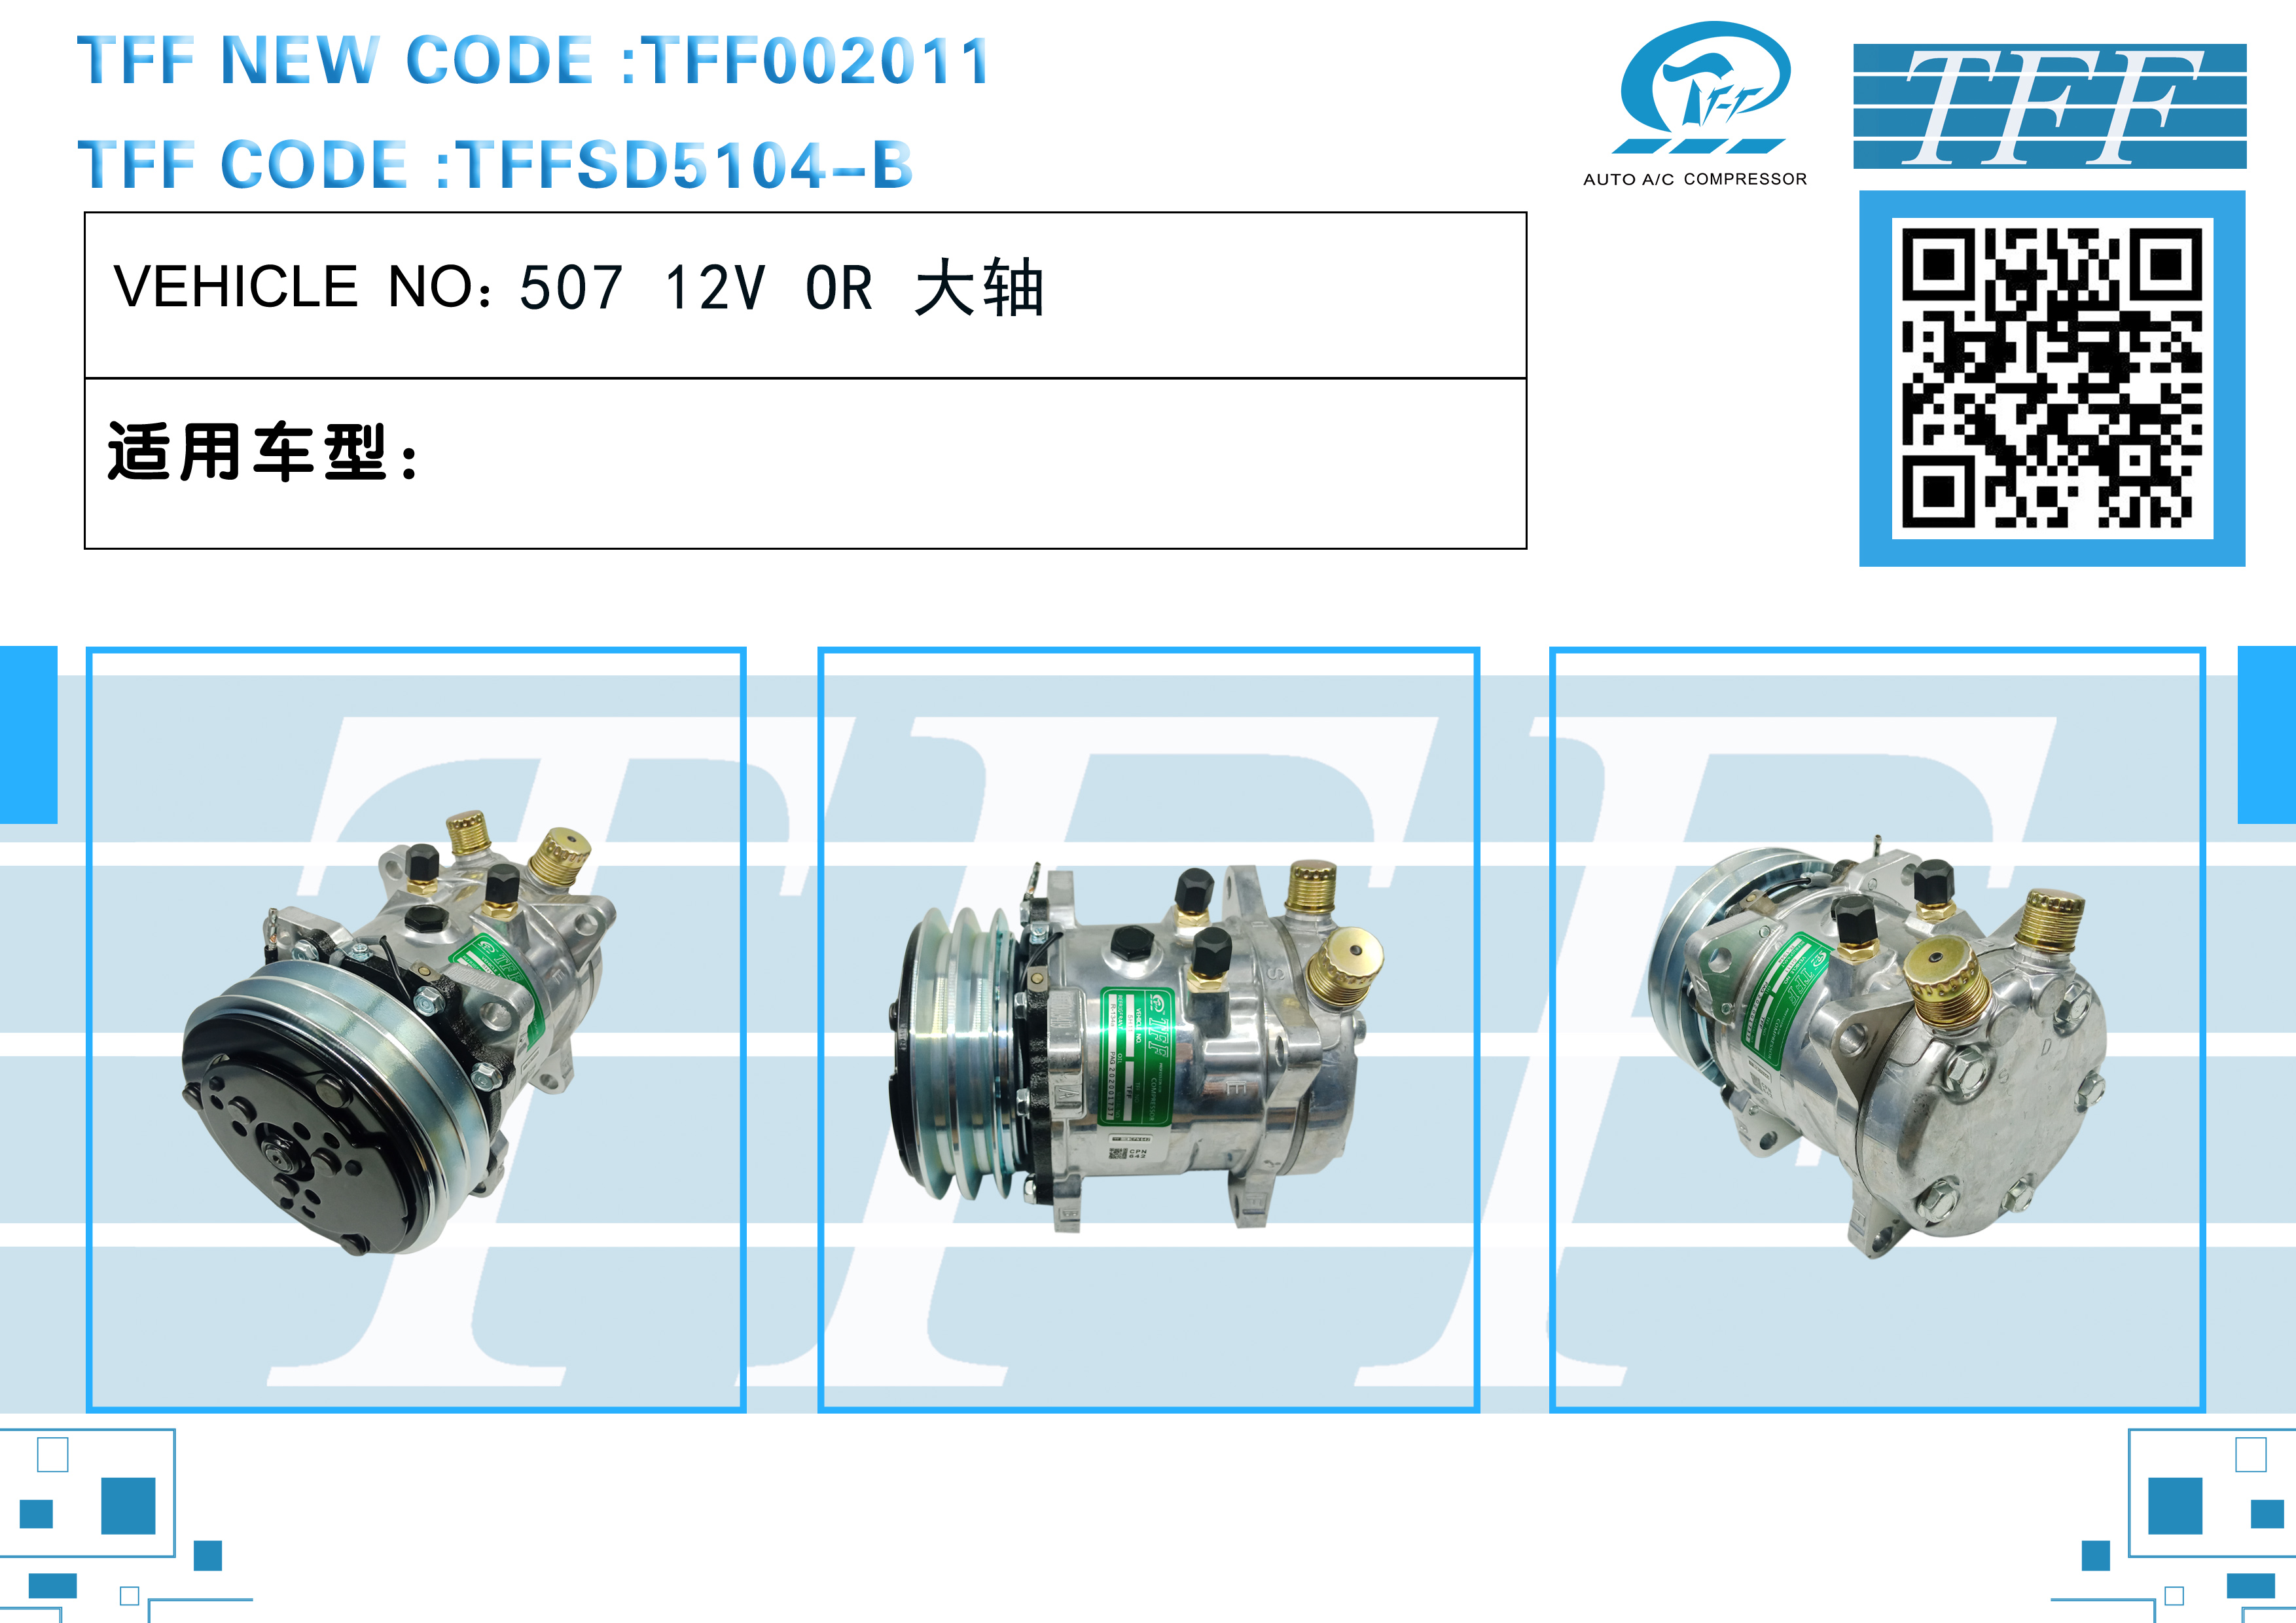 TFF002011 507 2A 12V OR (5H)40 (bearing)